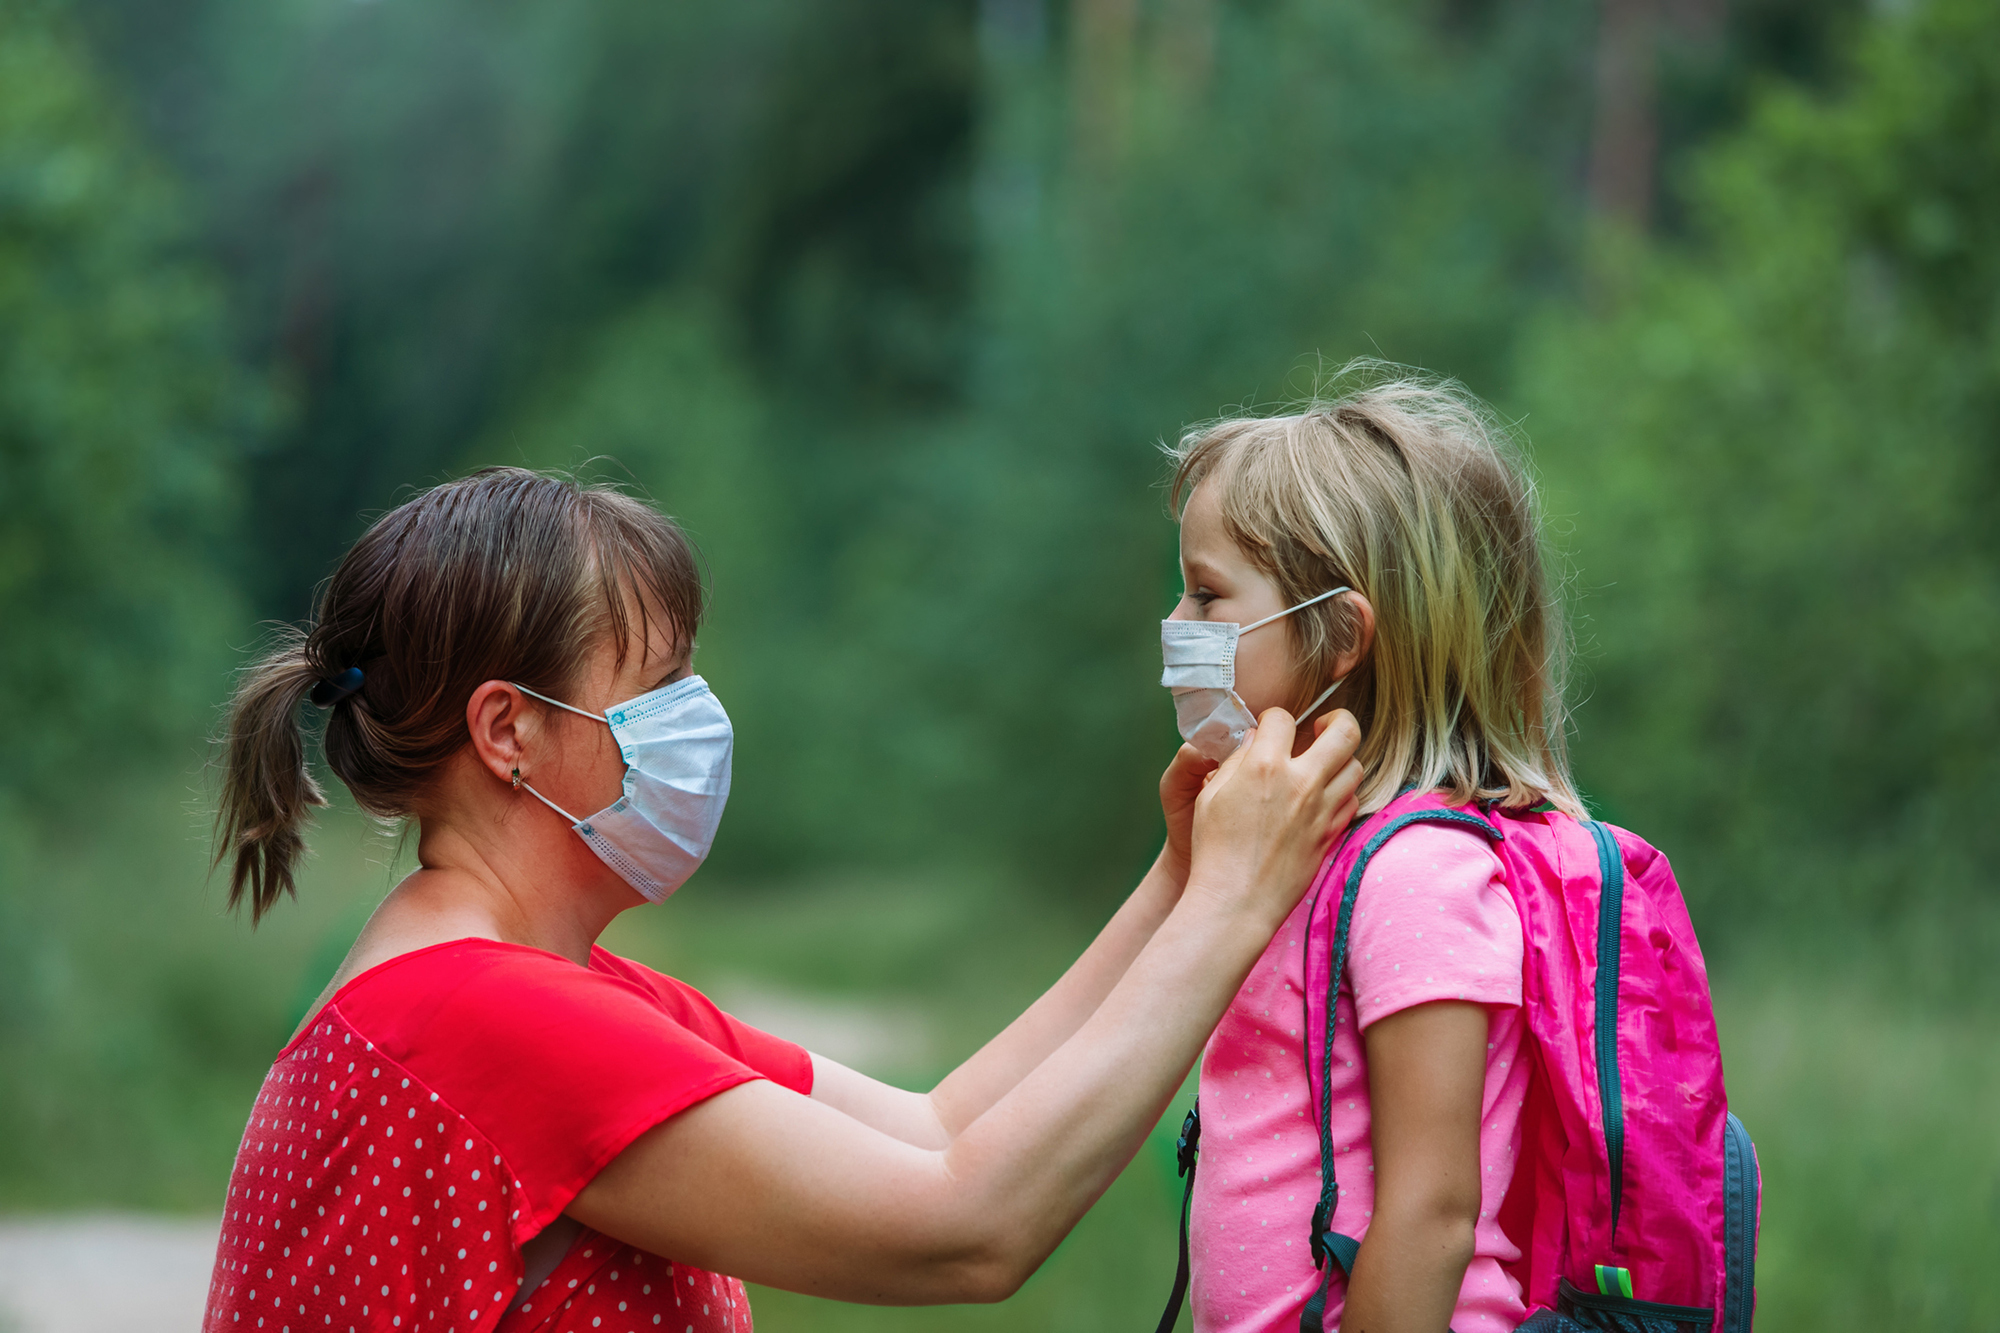 Adult wearing mask adjusts the mask of a young child